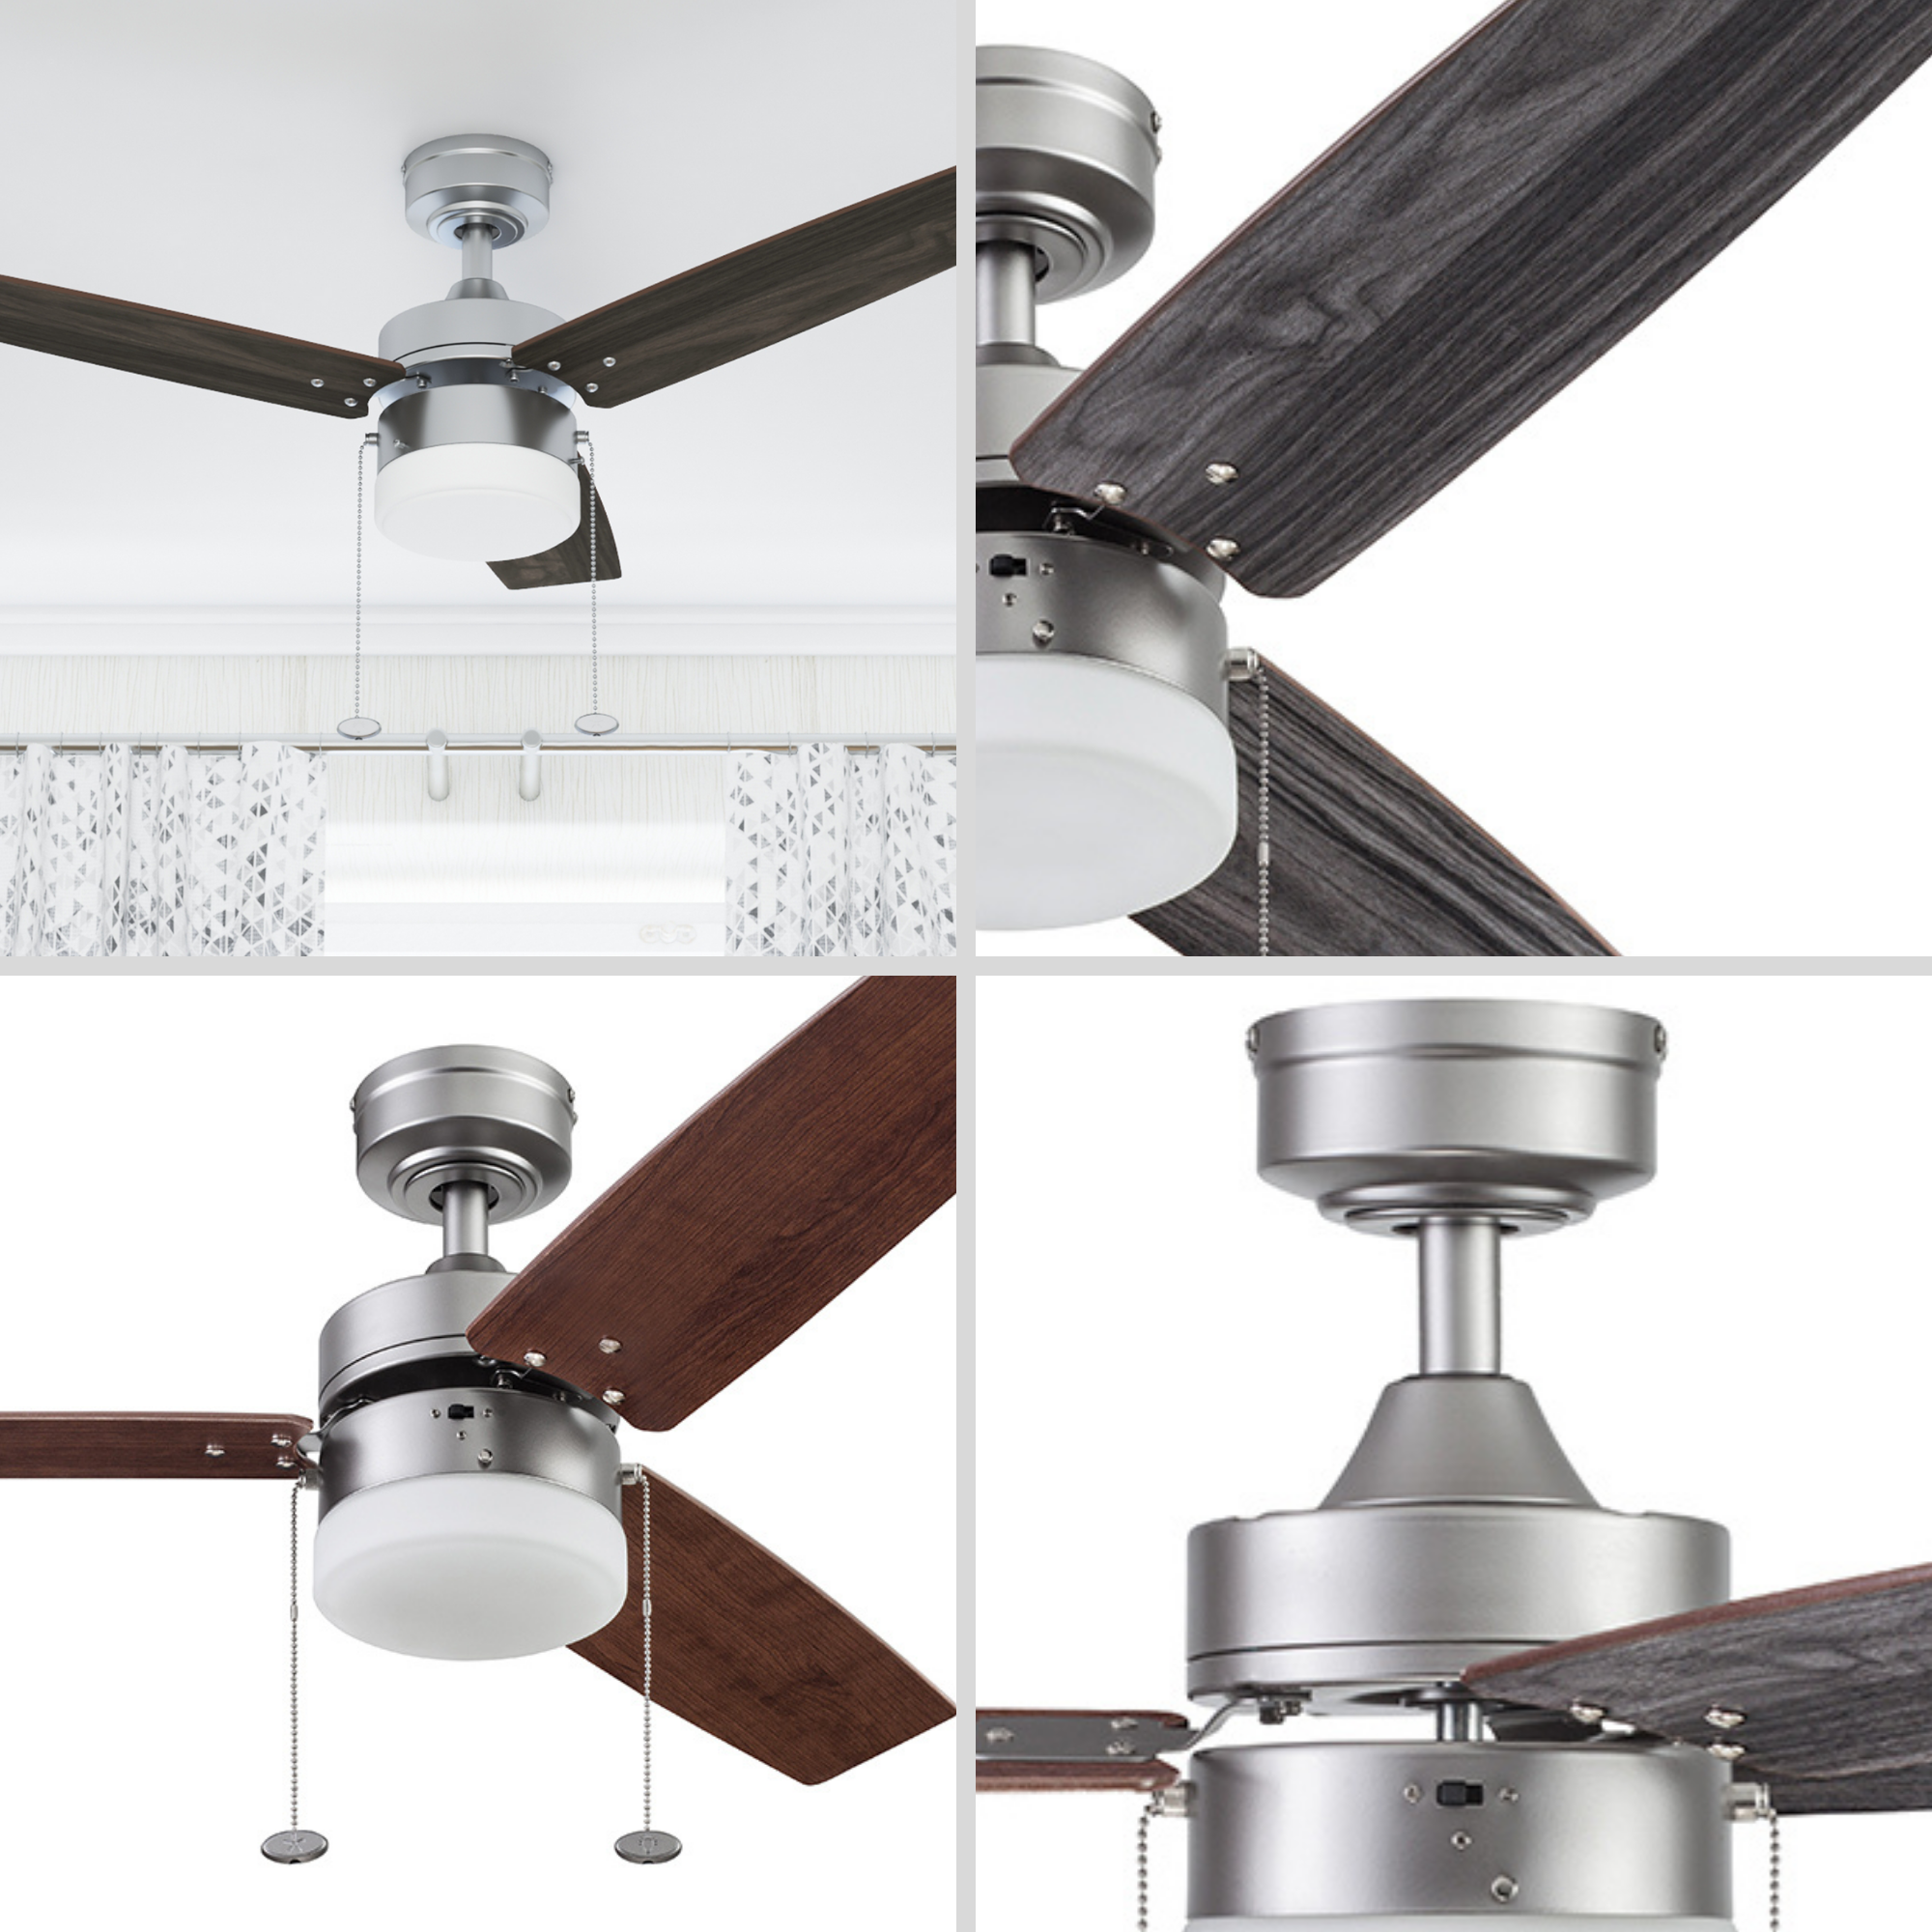 42 Inch Reston, Pewter, Pull Chain, Ceiling Fan by Prominence Home